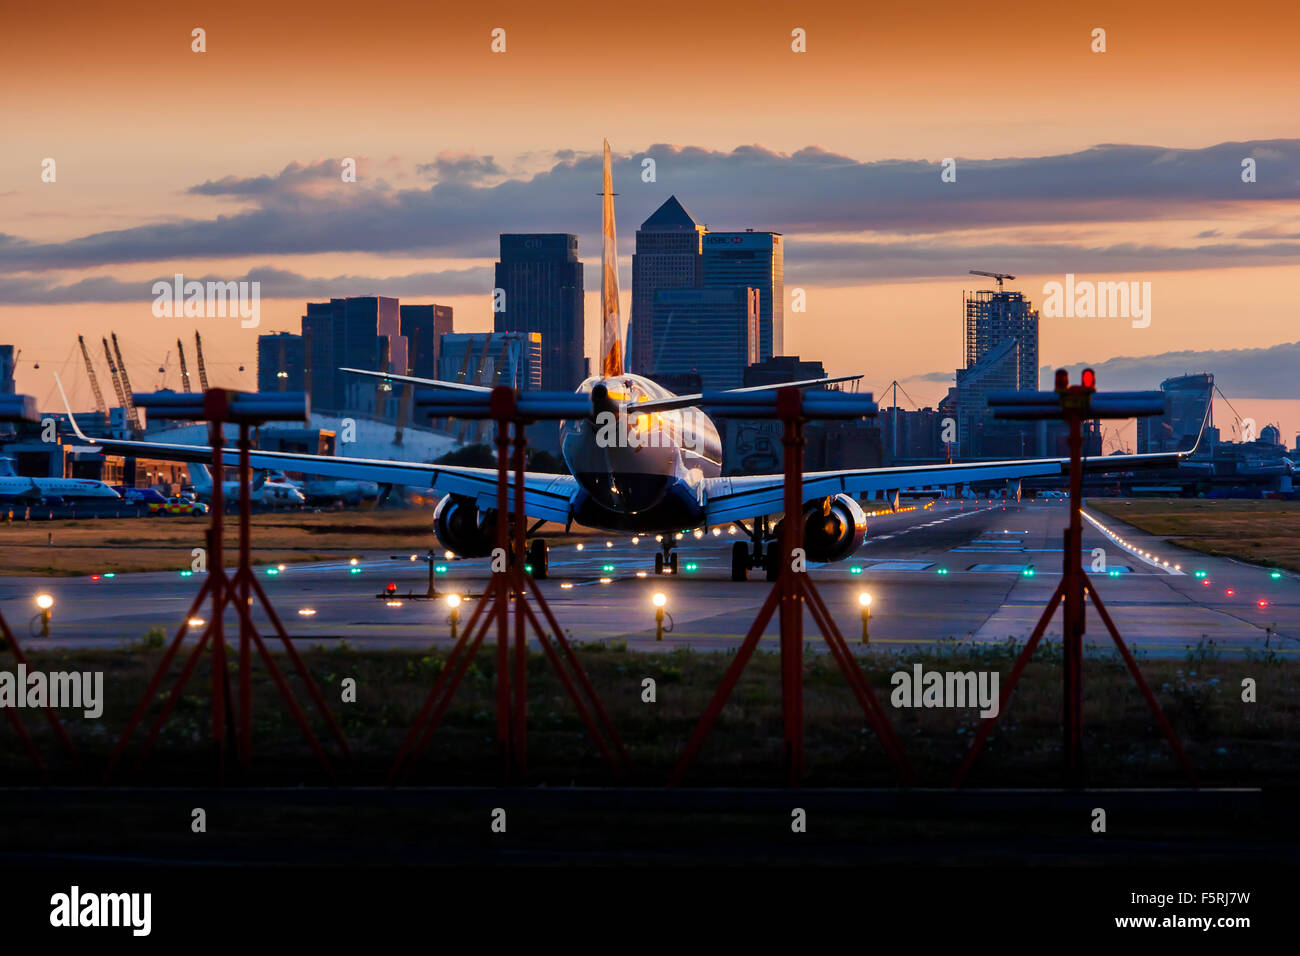 A passenger jet plane waiting to depart on the runway at London City Airport Stock Photo